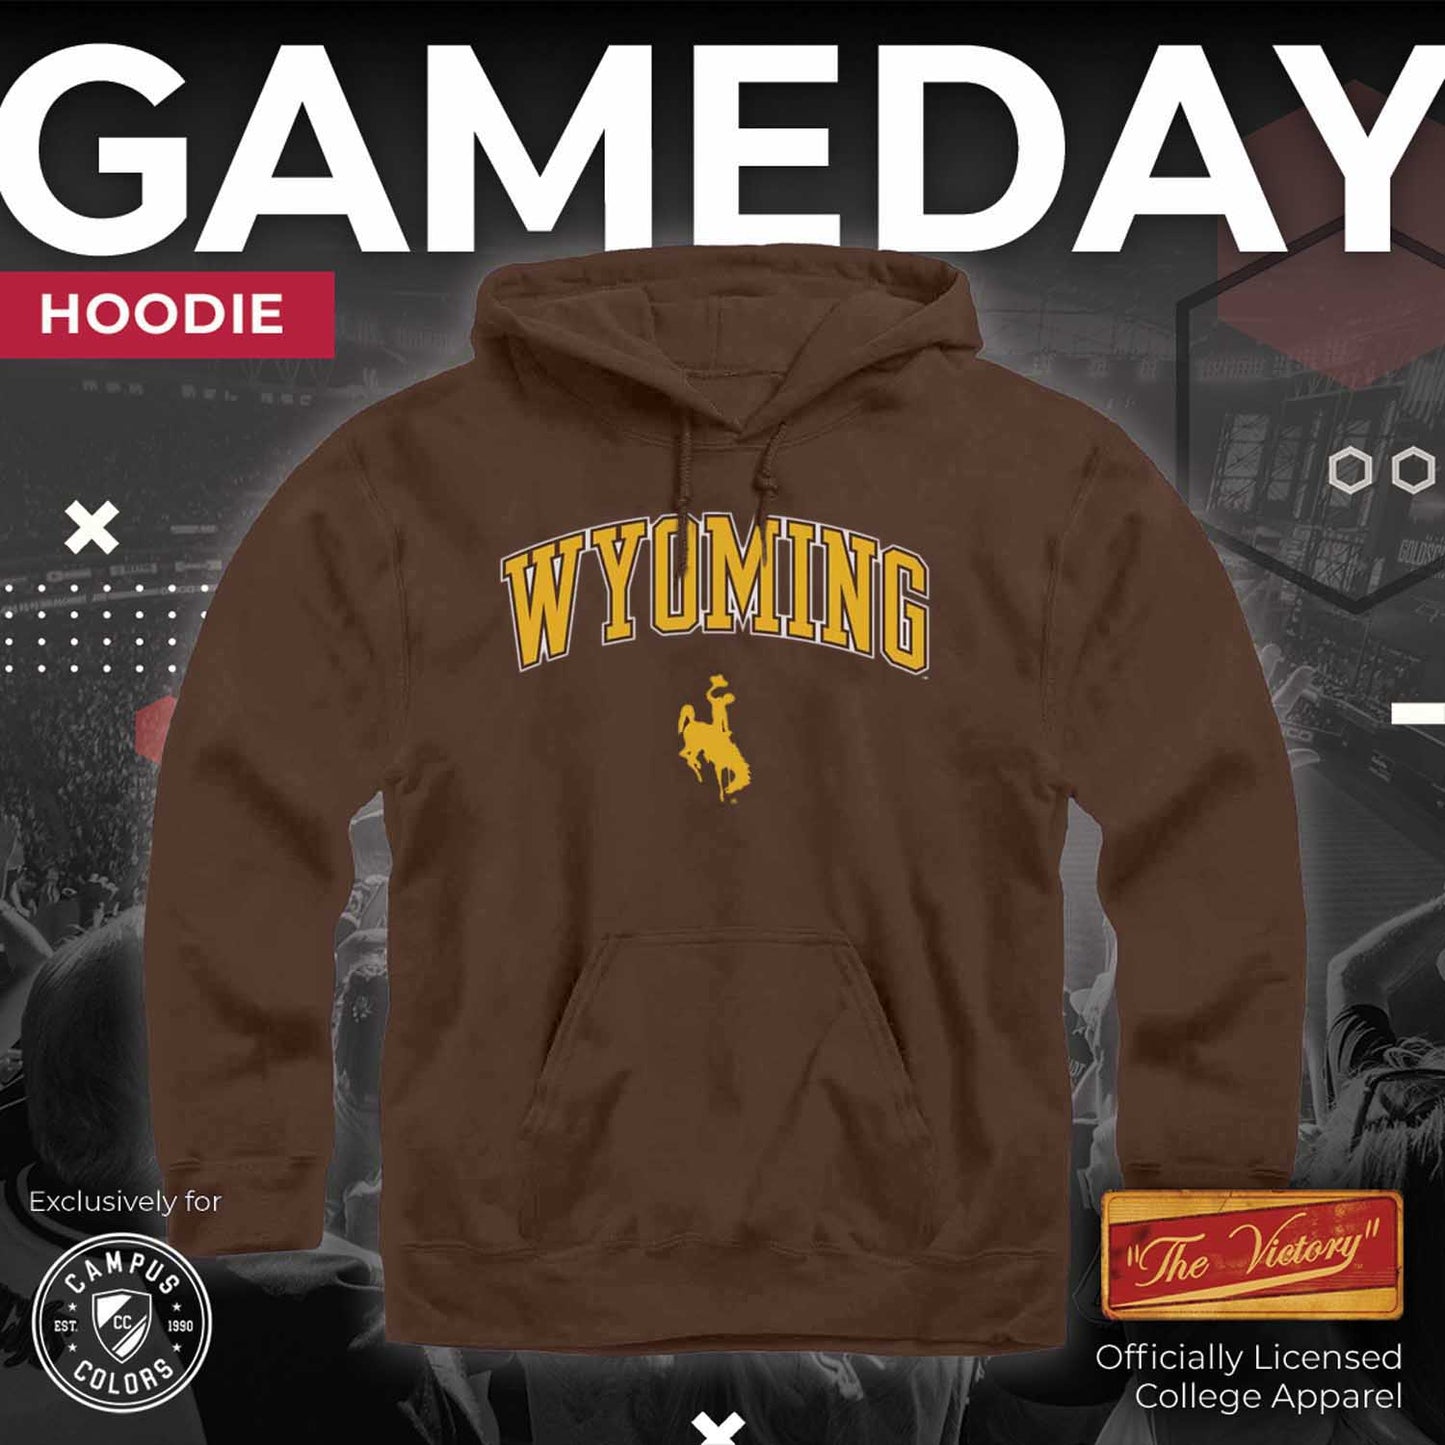 Wyoming Cowboys Adult Arch & Logo Soft Style Gameday Hooded Sweatshirt - Brown